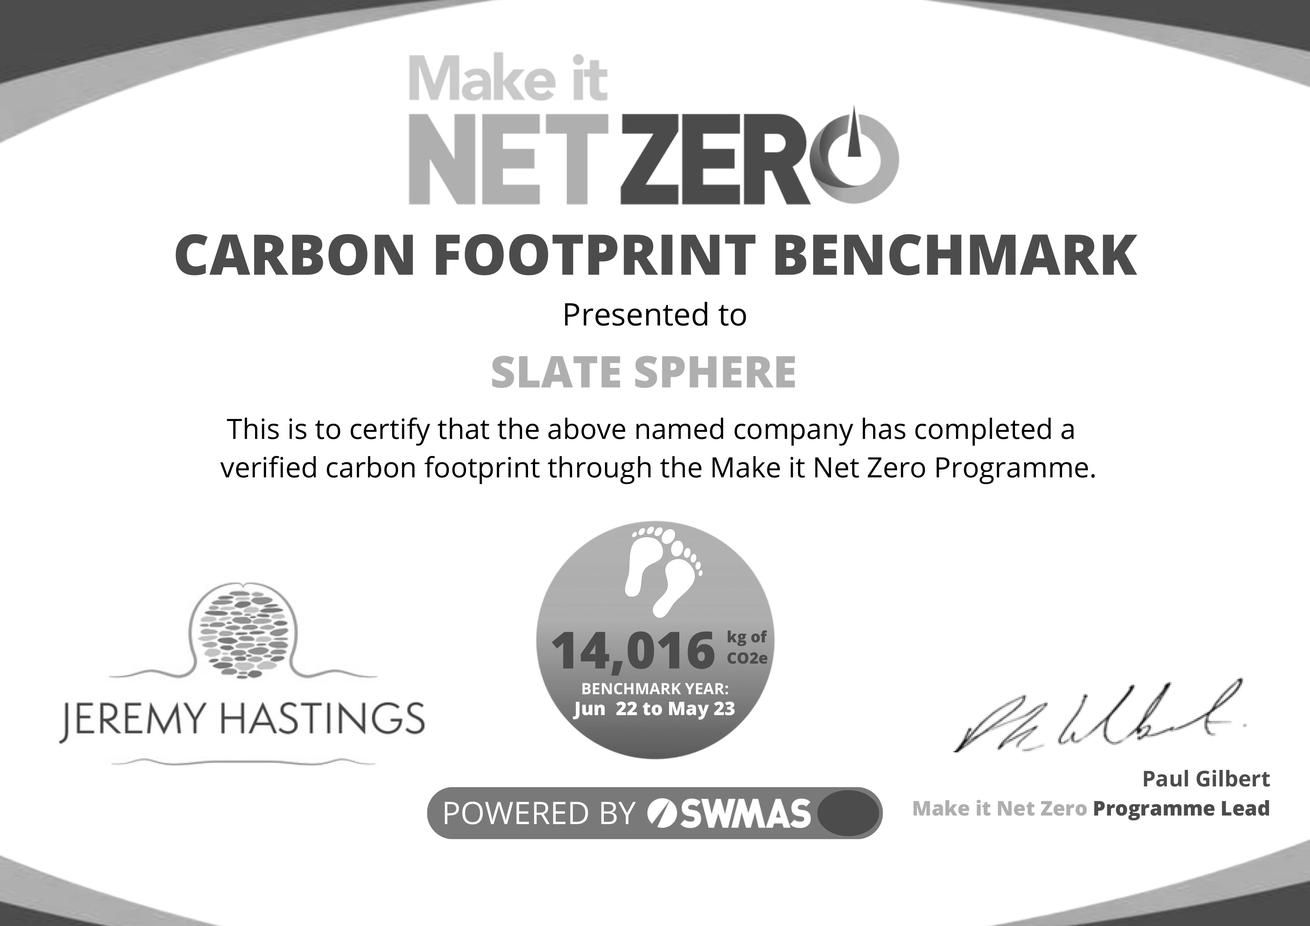 Certificate awarded for the completion of a verified carbon footprint through the Make it Net Zero Programme